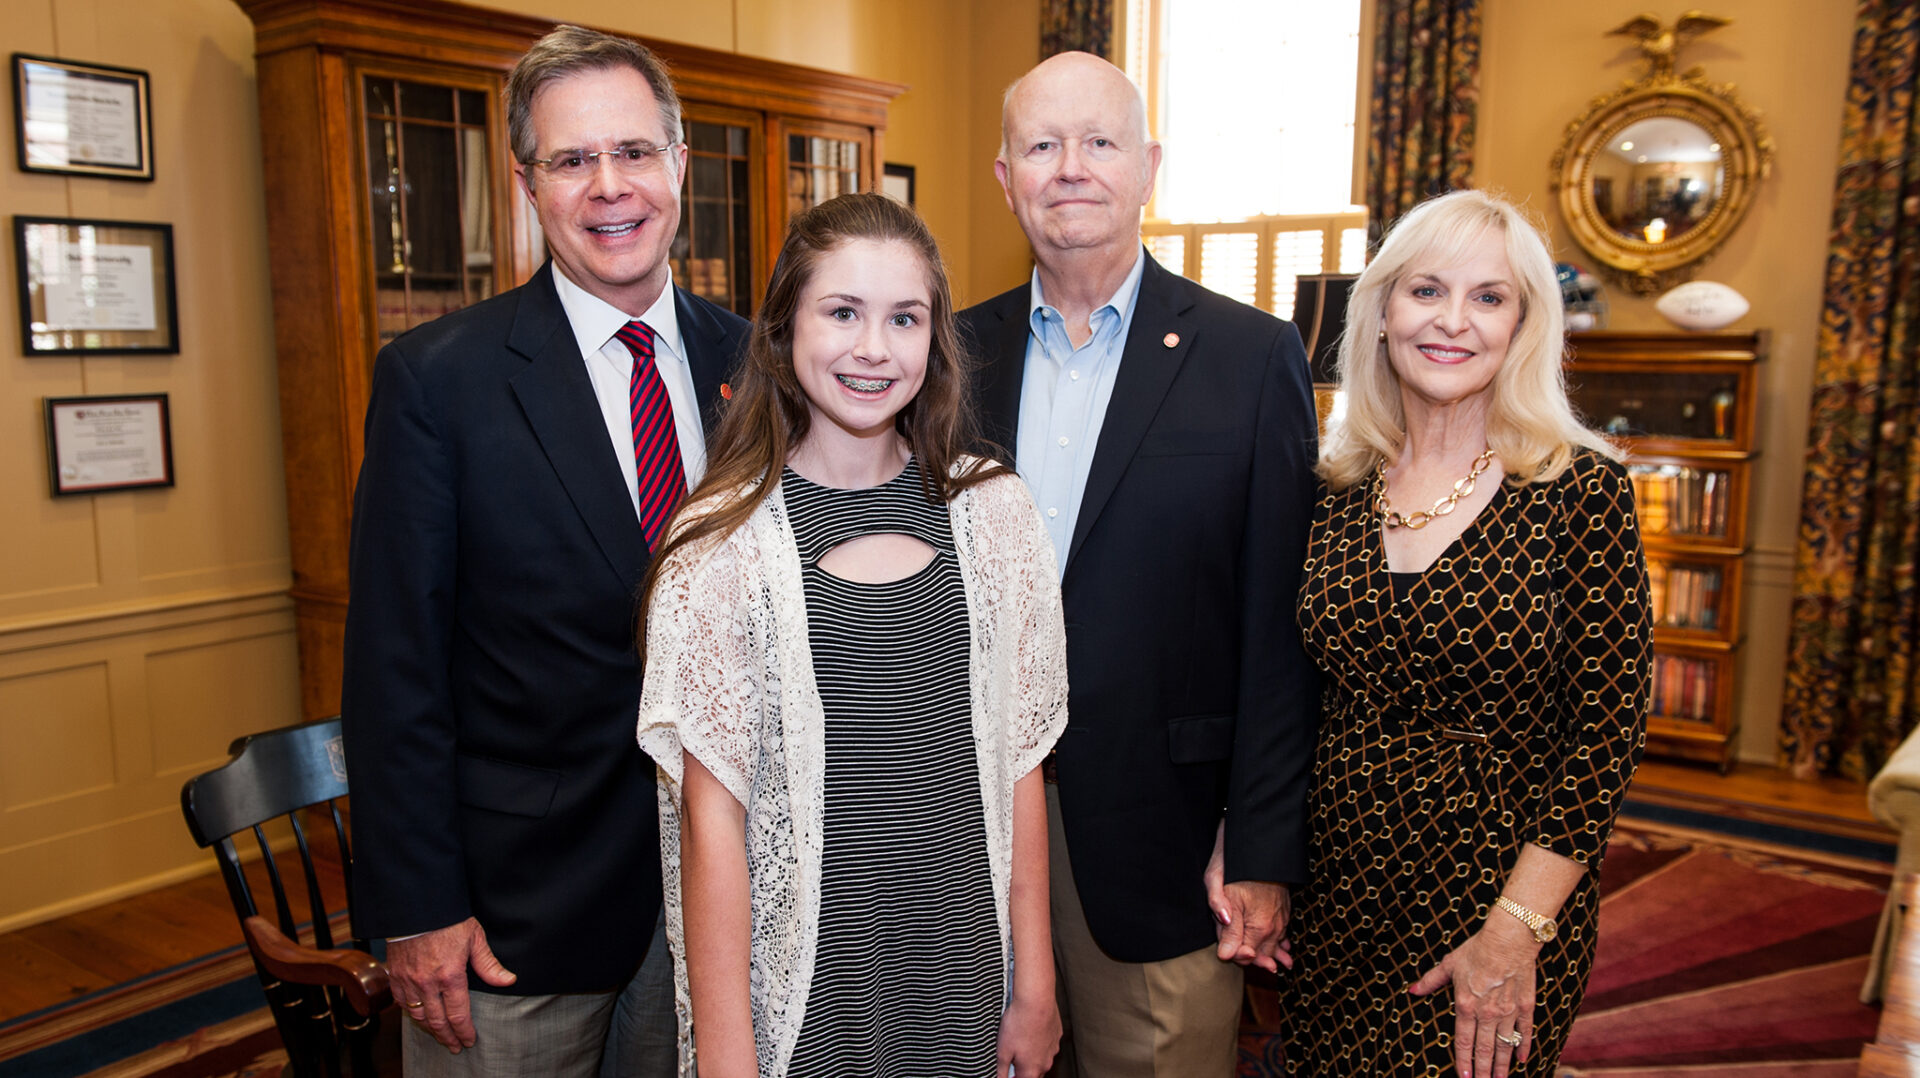 UM Chancellor Jeffrey Vitter, left, visits with Paige, Terry and Cindy Crawford to thank them for the Mitchell Crawford Eagle Scout Scholarship Endowment. The scholarship will assist business students with first preference going to Eagle Scouts. UM photo by Bill Dabney